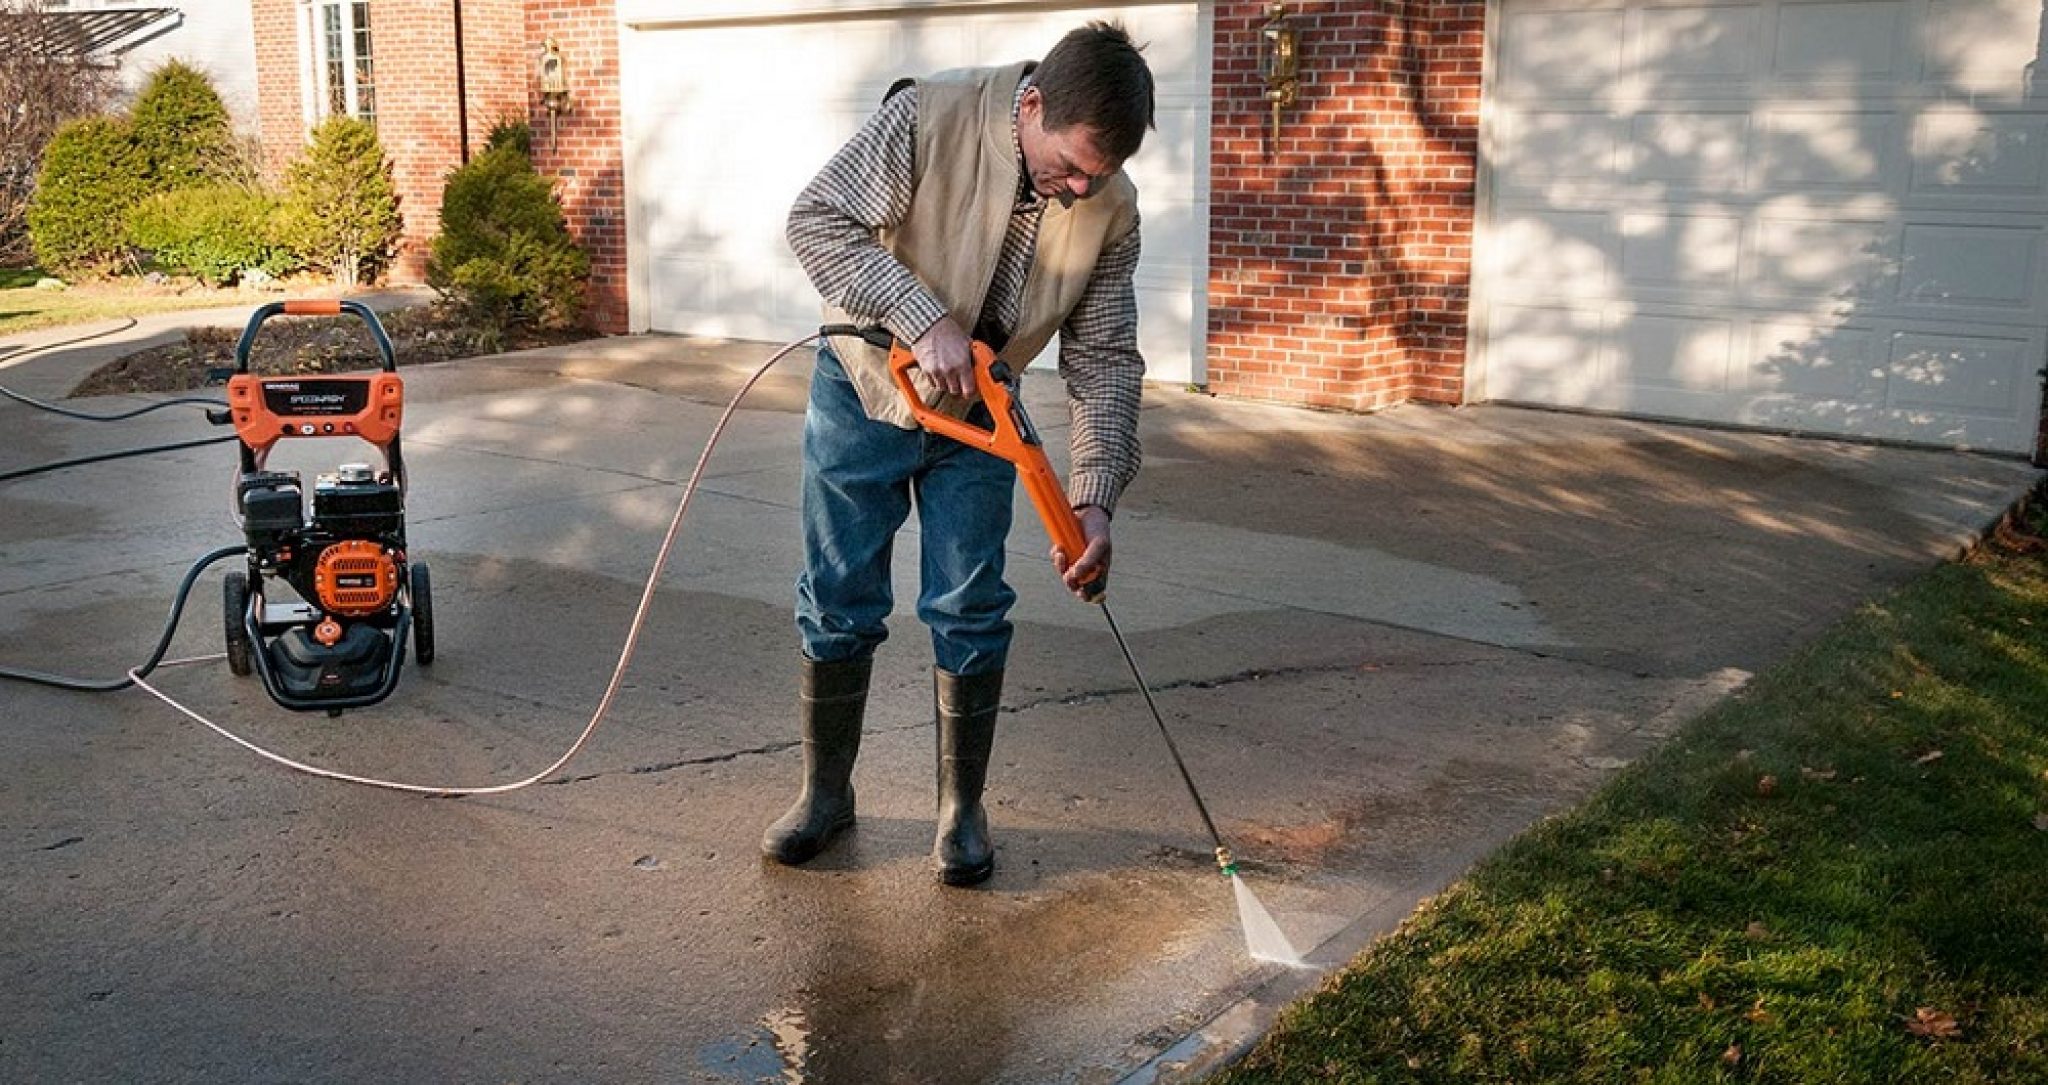 Pacific Hydrostar Pressure Washer Review